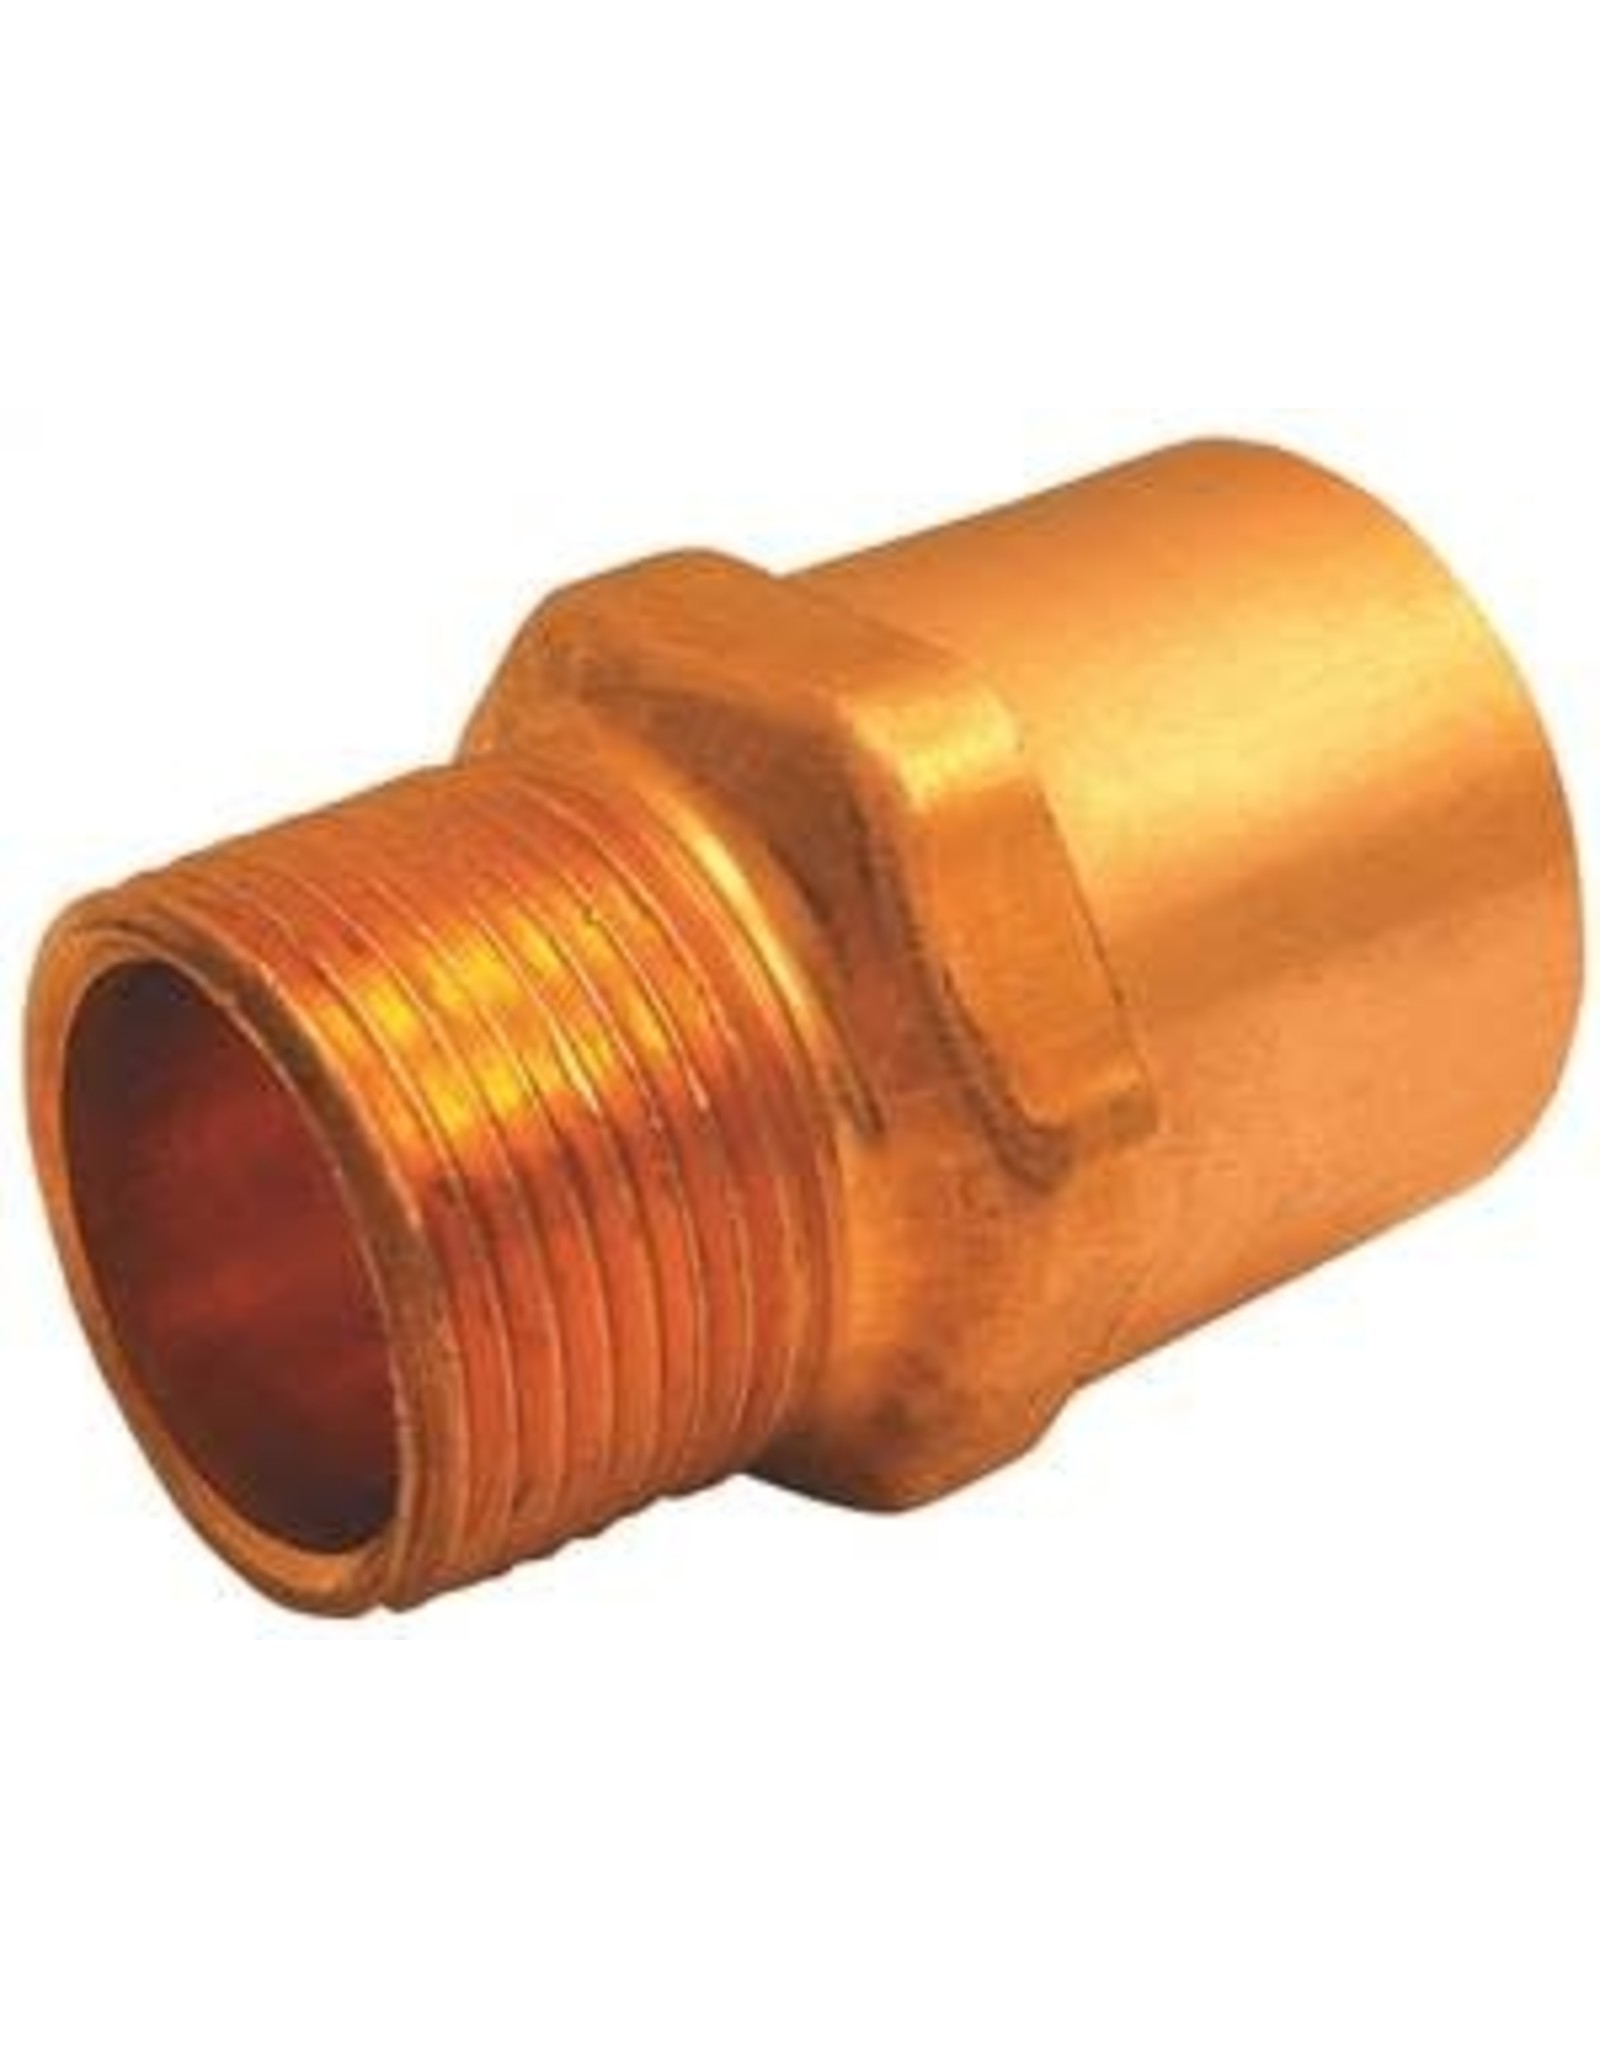 Elkhart EPC 104R Series 30316 Reducing Adapter, 1/2 x 3/4 in, Sweat x MNPT, Copper